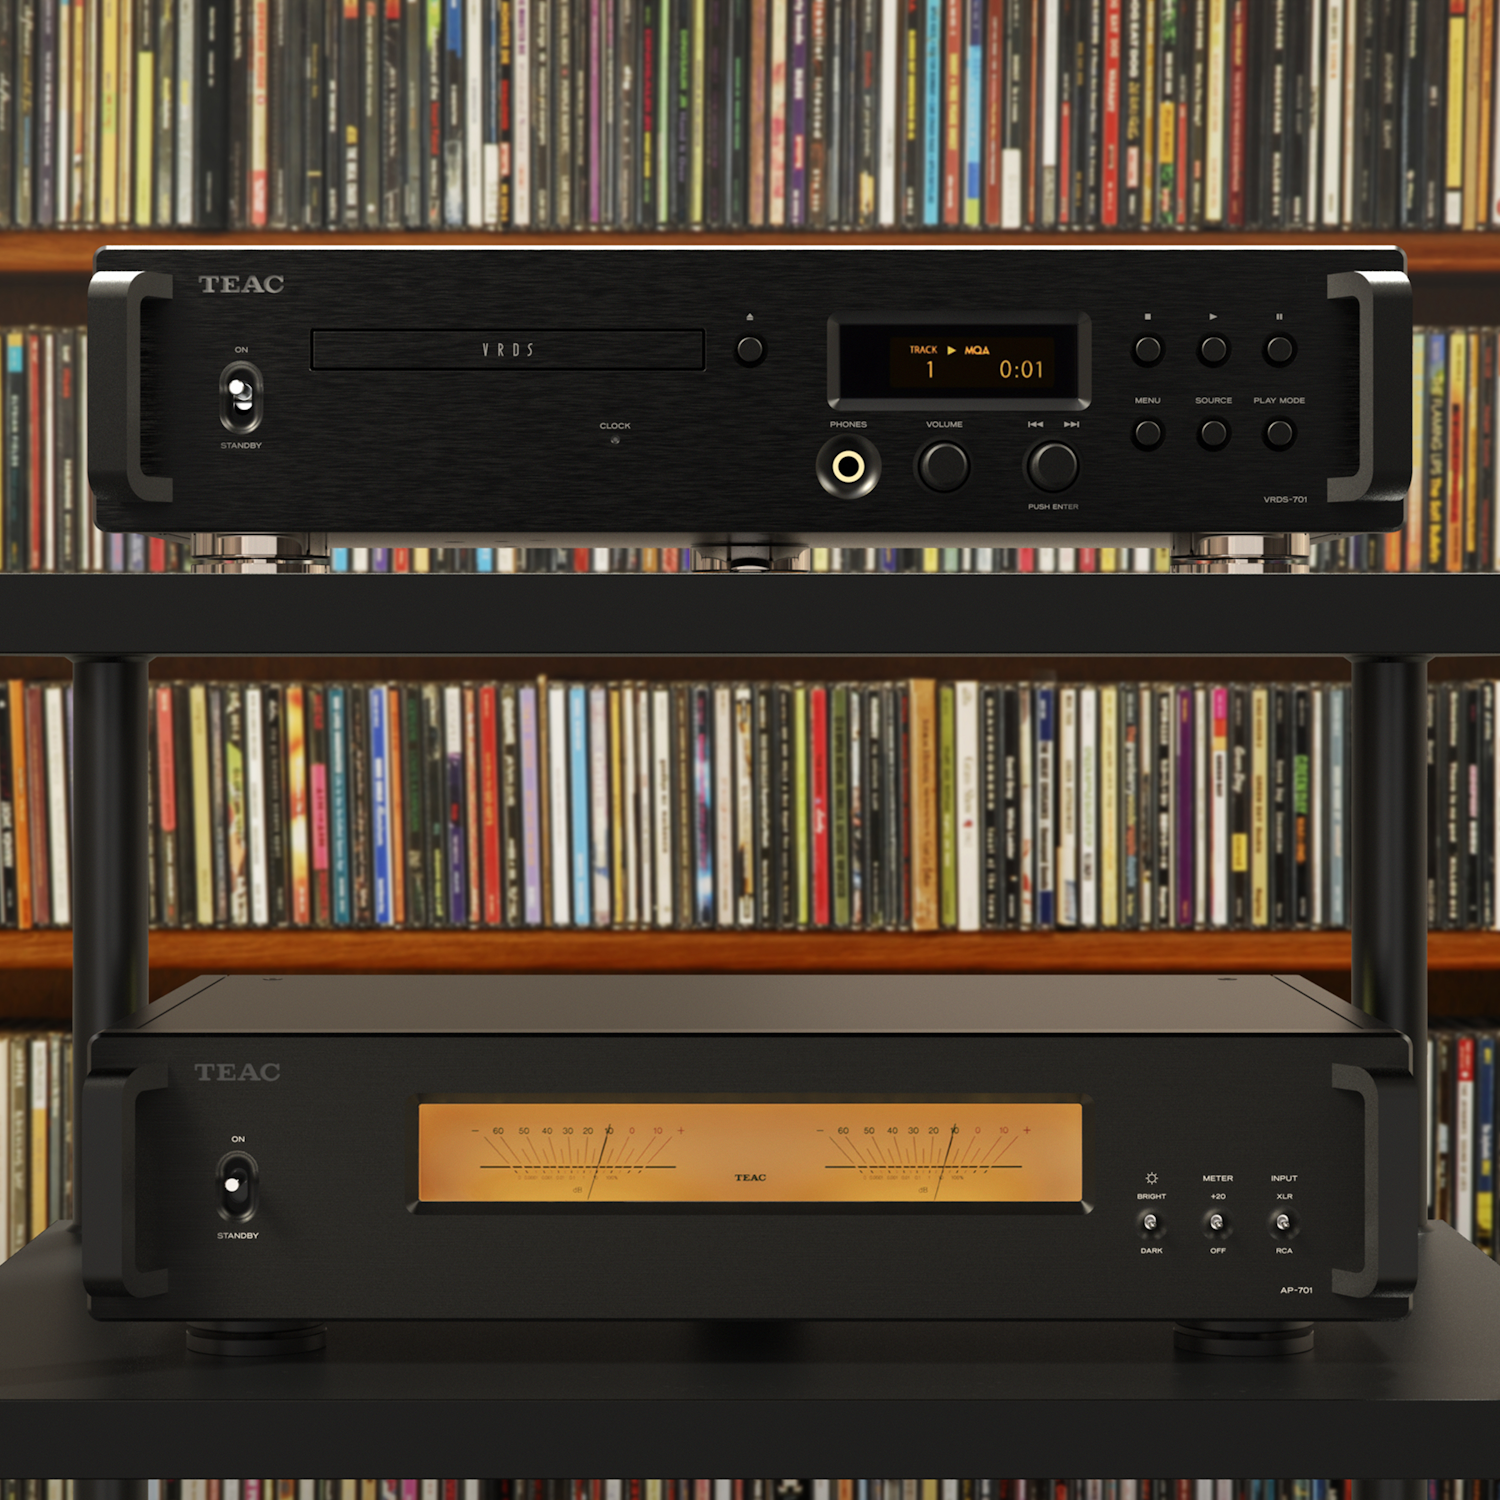 TEAC VRDS 701 in Rack in front of CD Collection 2000x2000